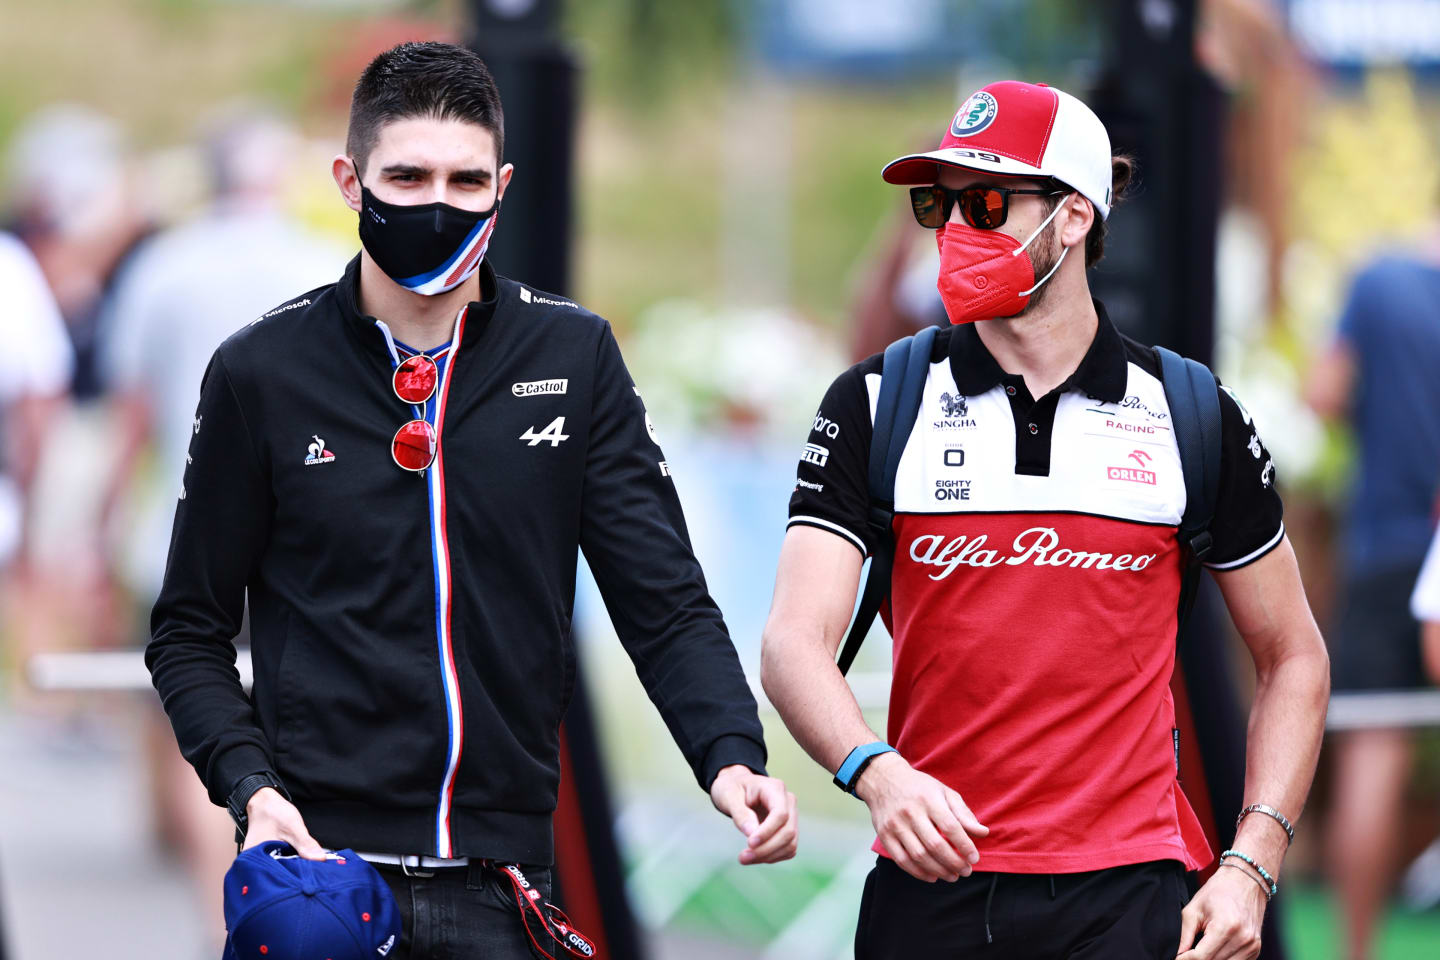 SPIELBERG, AUSTRIA - JUNE 25: Esteban Ocon of France and Alpine F1 Team and Antonio Giovinazzi of Italy and Alfa Romeo Racing talk in the Paddock before practice ahead of the F1 Grand Prix of Styria at Red Bull Ring on June 25, 2021 in Spielberg, Austria. (Photo by Mark Thompson/Getty Images)